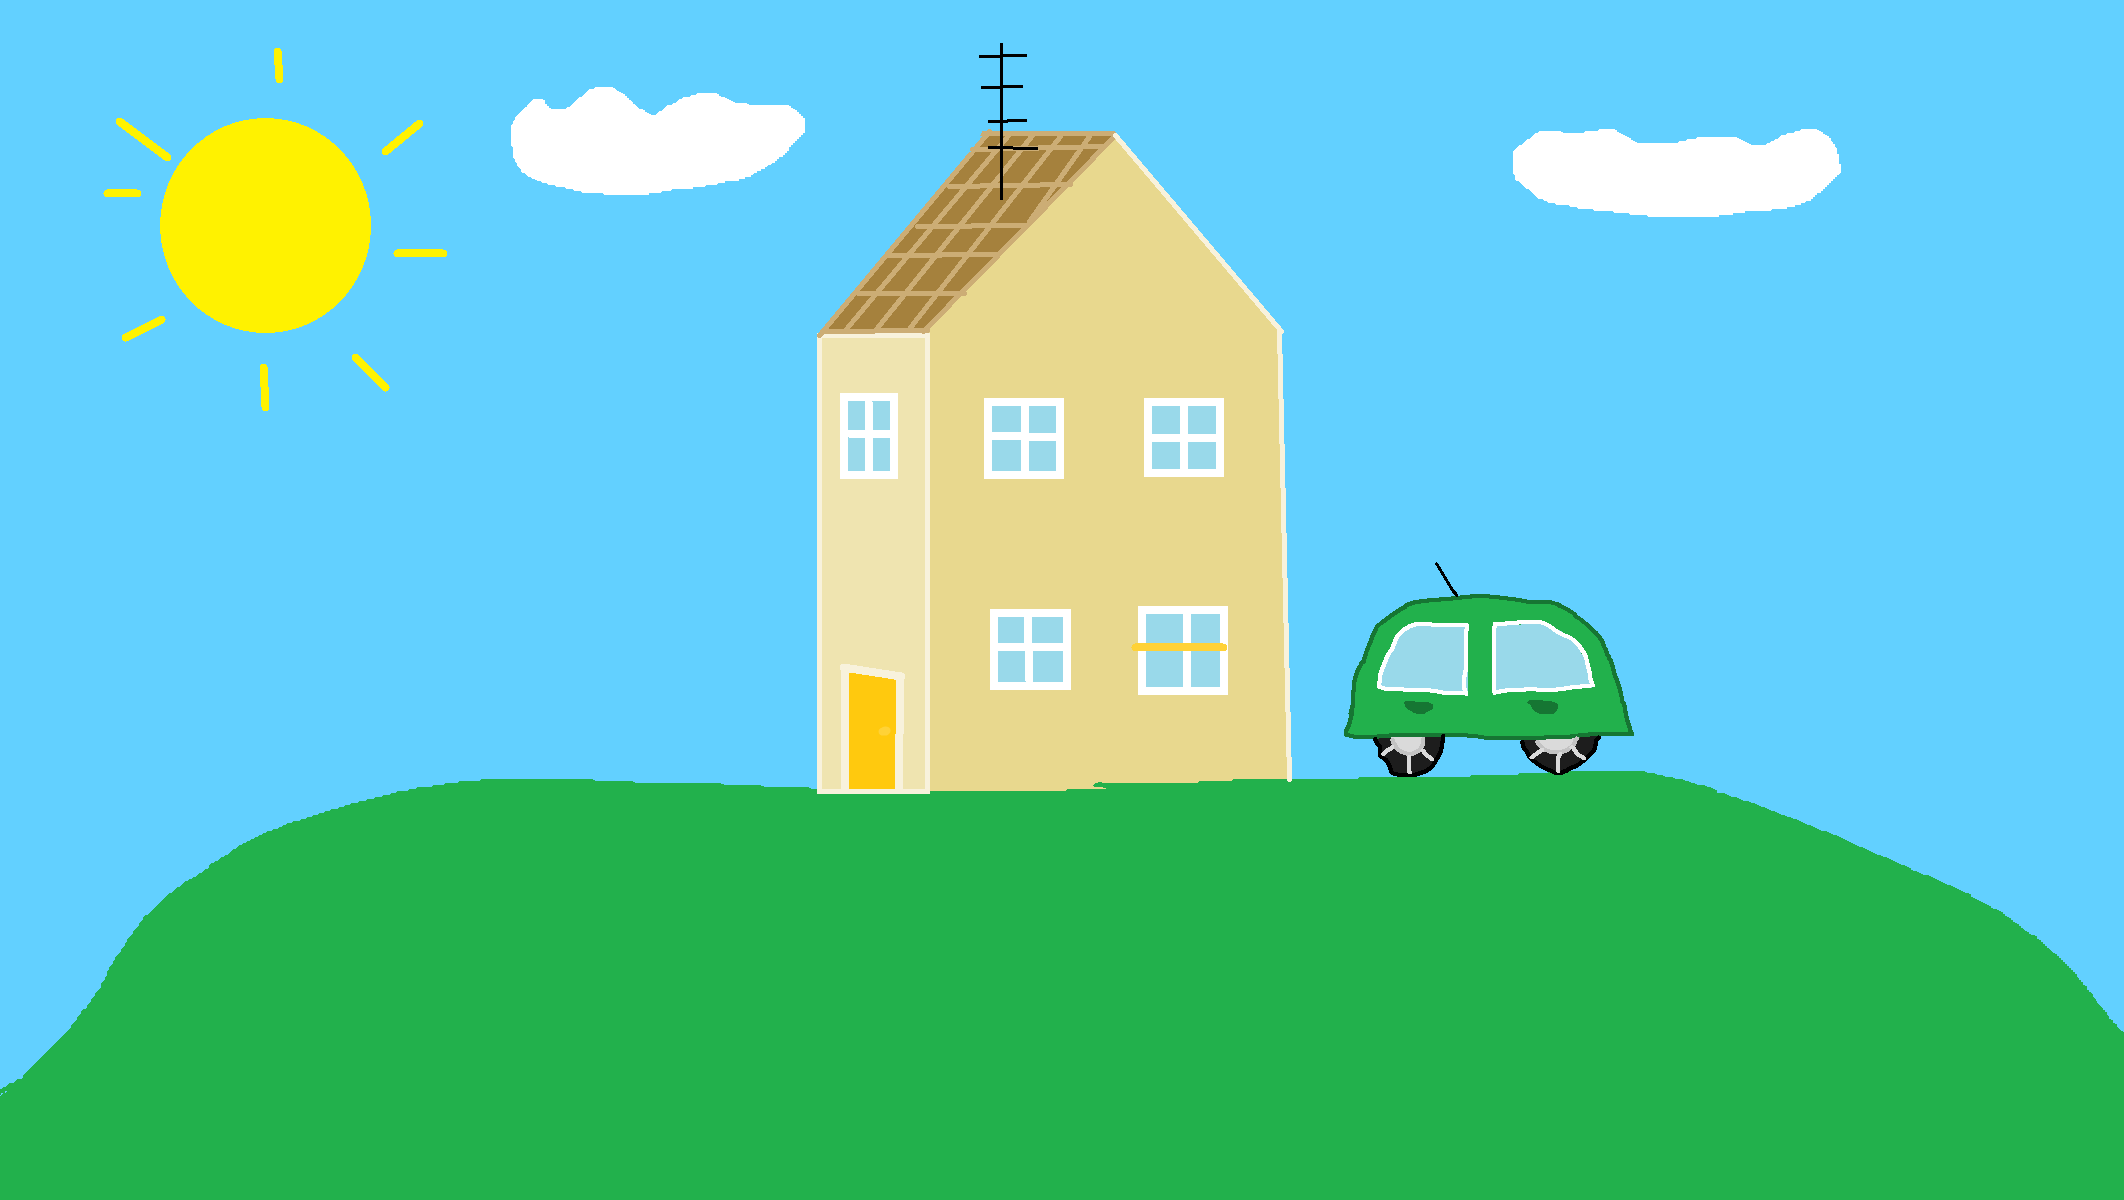 Peppa Pig's House background.png